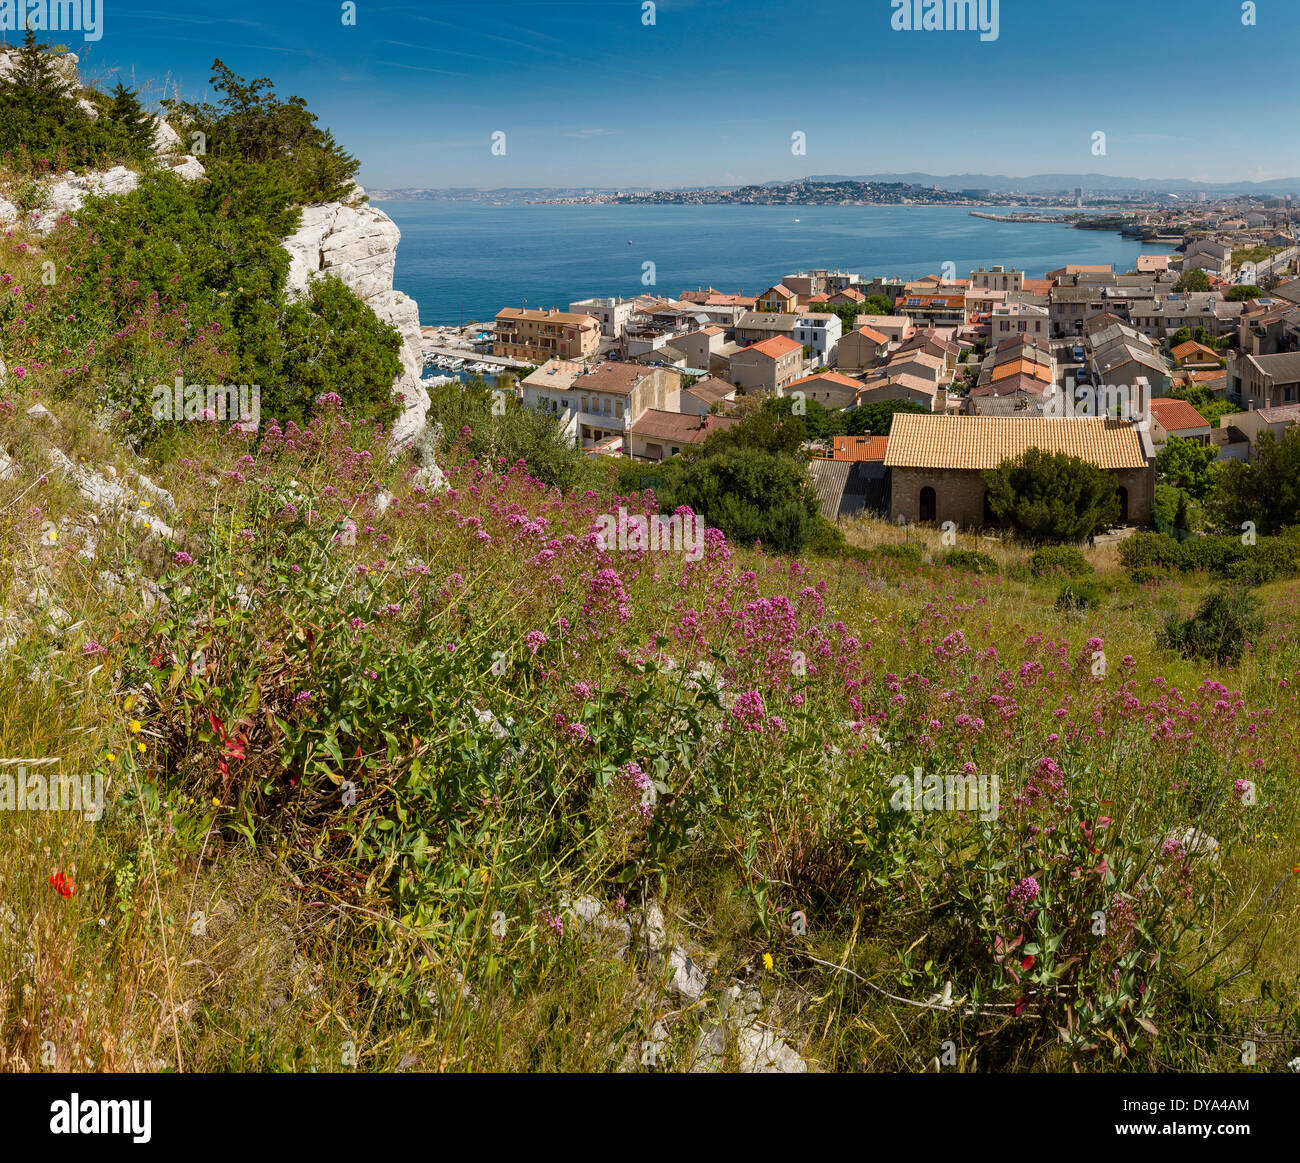 View, town, village, field, meadow, flowers, summer, mountains, sea, La Madrague, Marseilles, Bouches, France, Europe, Stock Photo